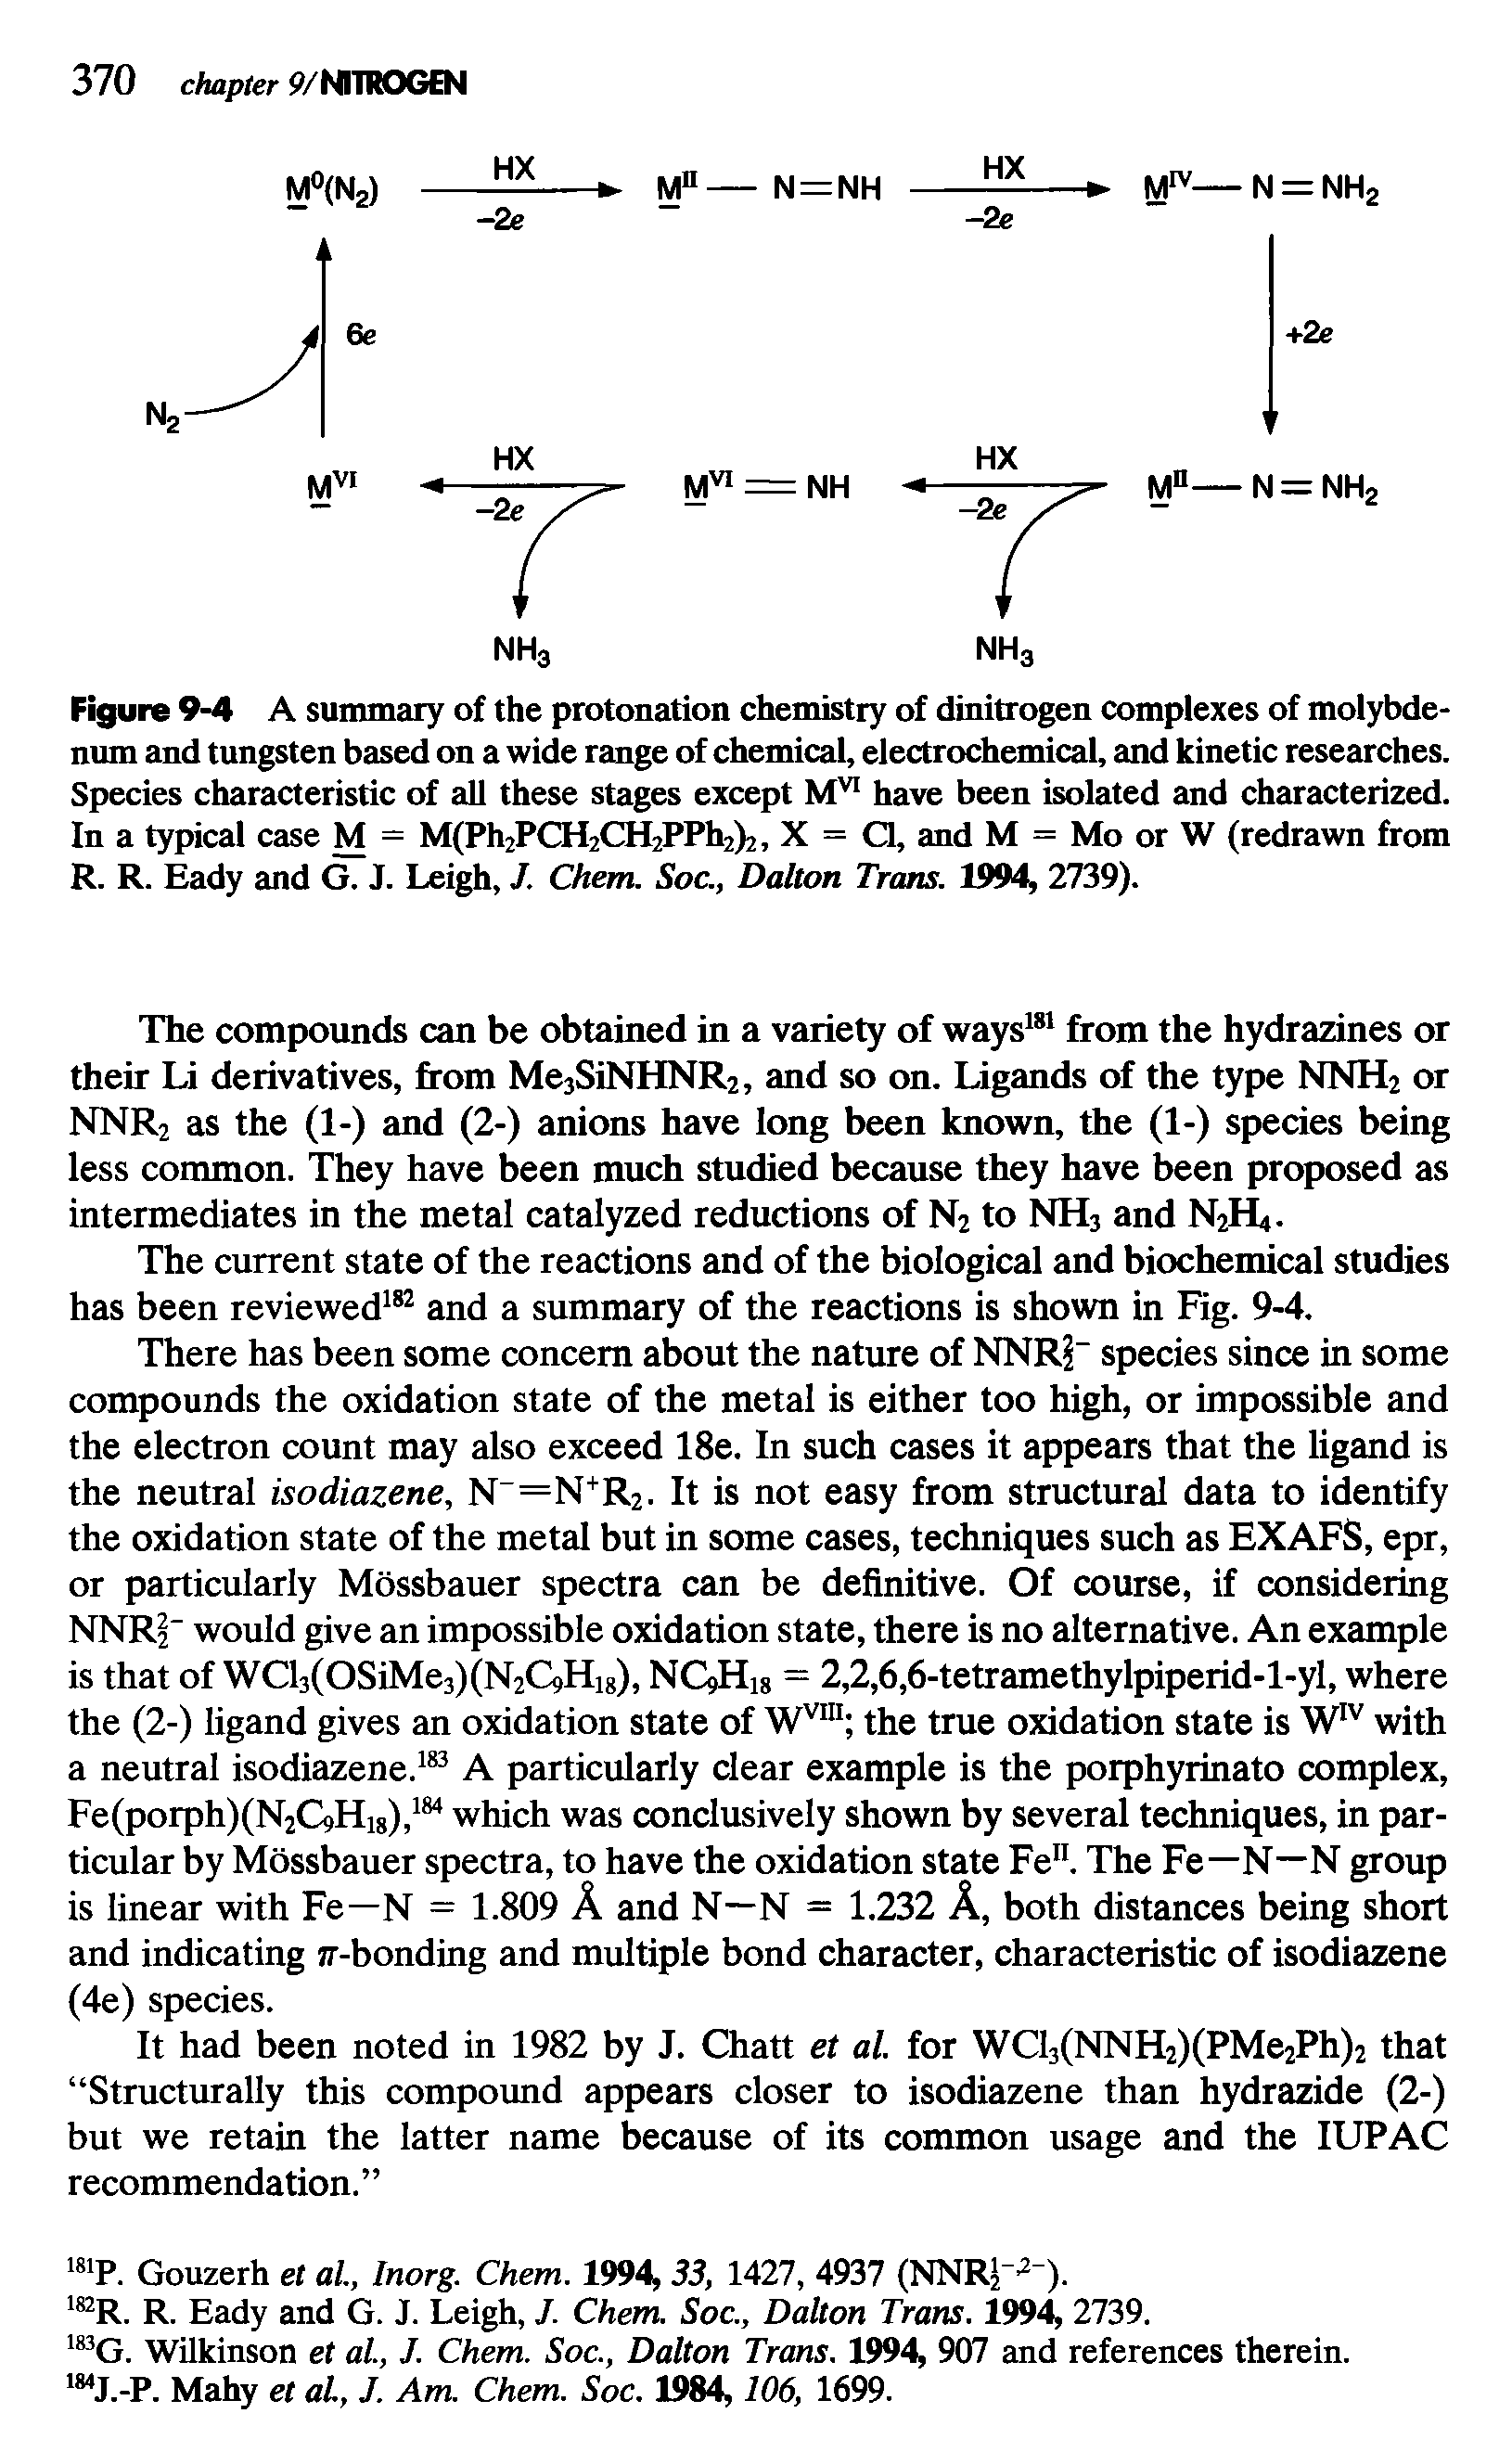 Figure 9-4 A summary of the protonation chemistry of dinitrogen complexes of molybdenum and tungsten based on a wide range of chemical, electrochemical, and kinetic researches. Species characteristic of all these stages except MVI have been isolated and characterized. In a typical case M = M(Ph2PCH2CH2PPh2)2, X = Q, and M = Mo or W (redrawn from R. R. Eady and G. J. Leigh, J. Chem. Soc., Dalton Trans. 1994, 2739).